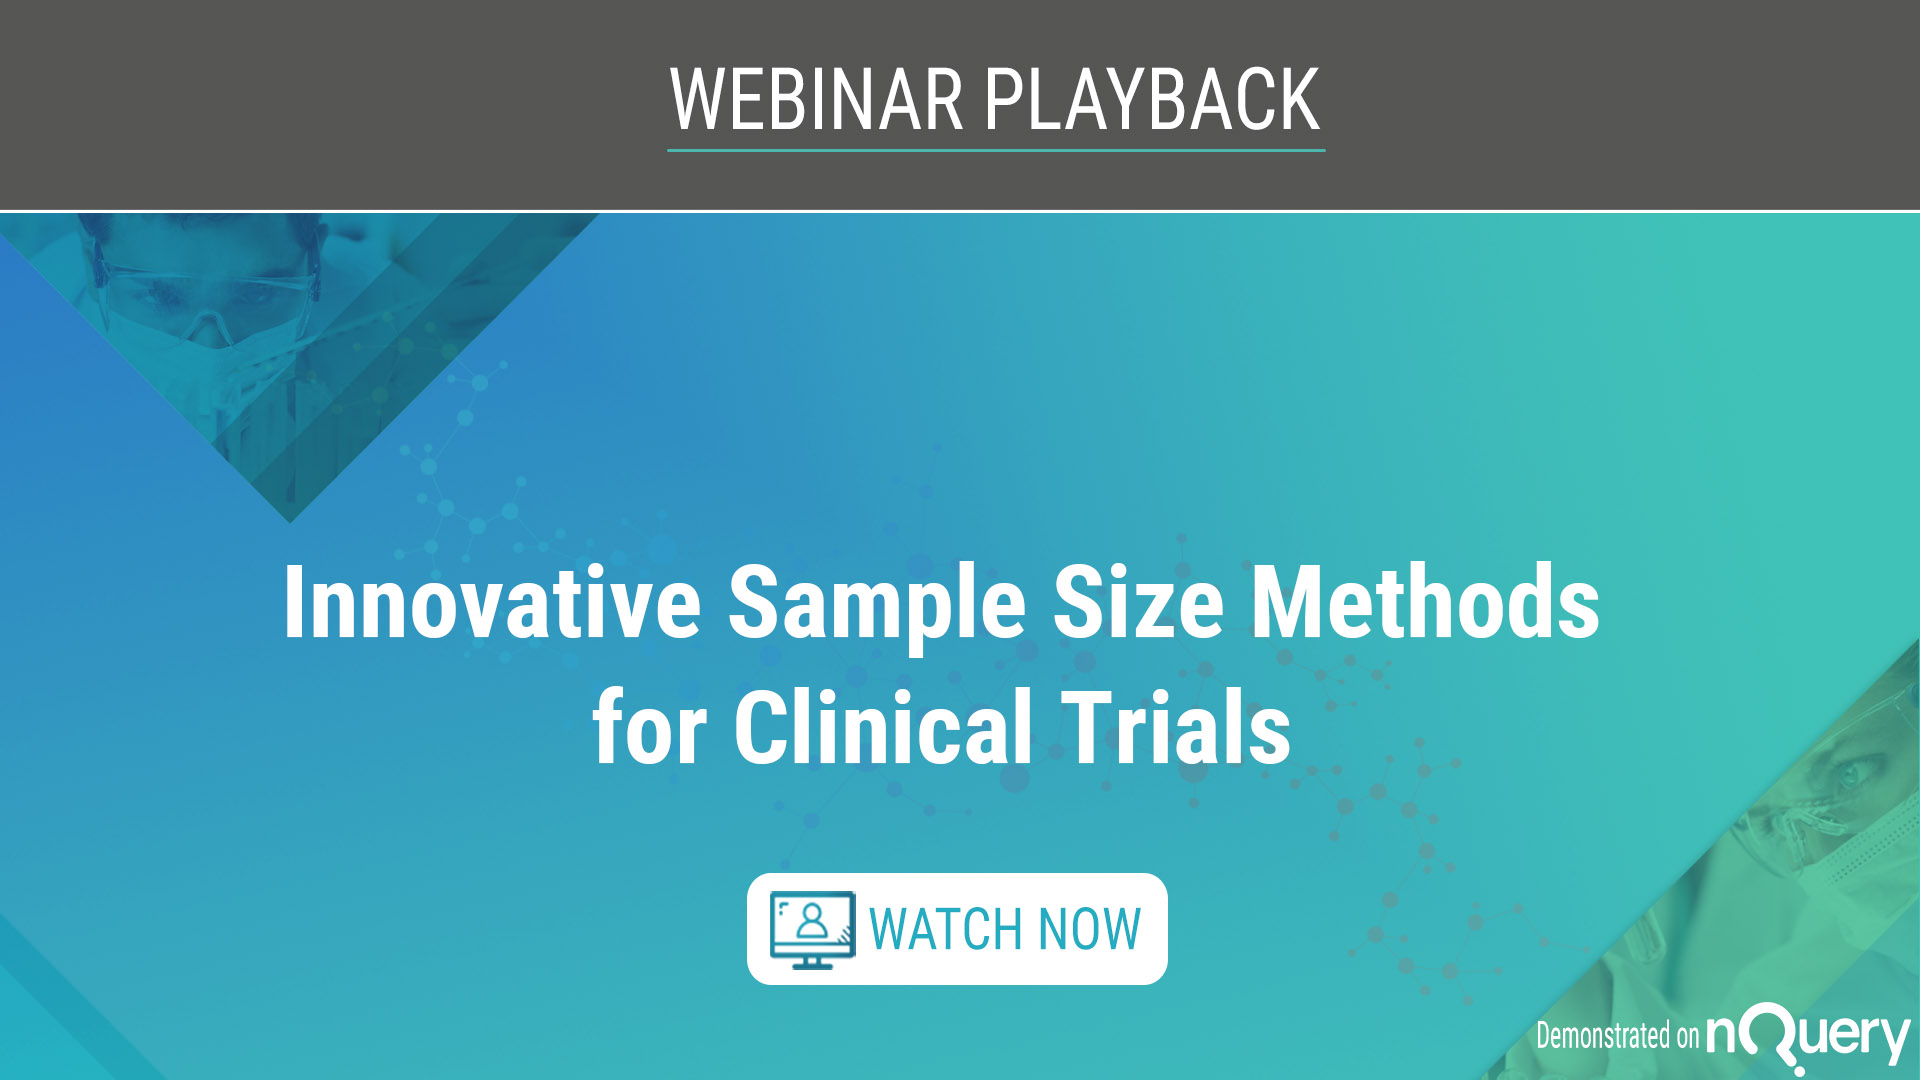 Innovative Sample Size Methods for Clinical Trials-on-demand-1920-1080